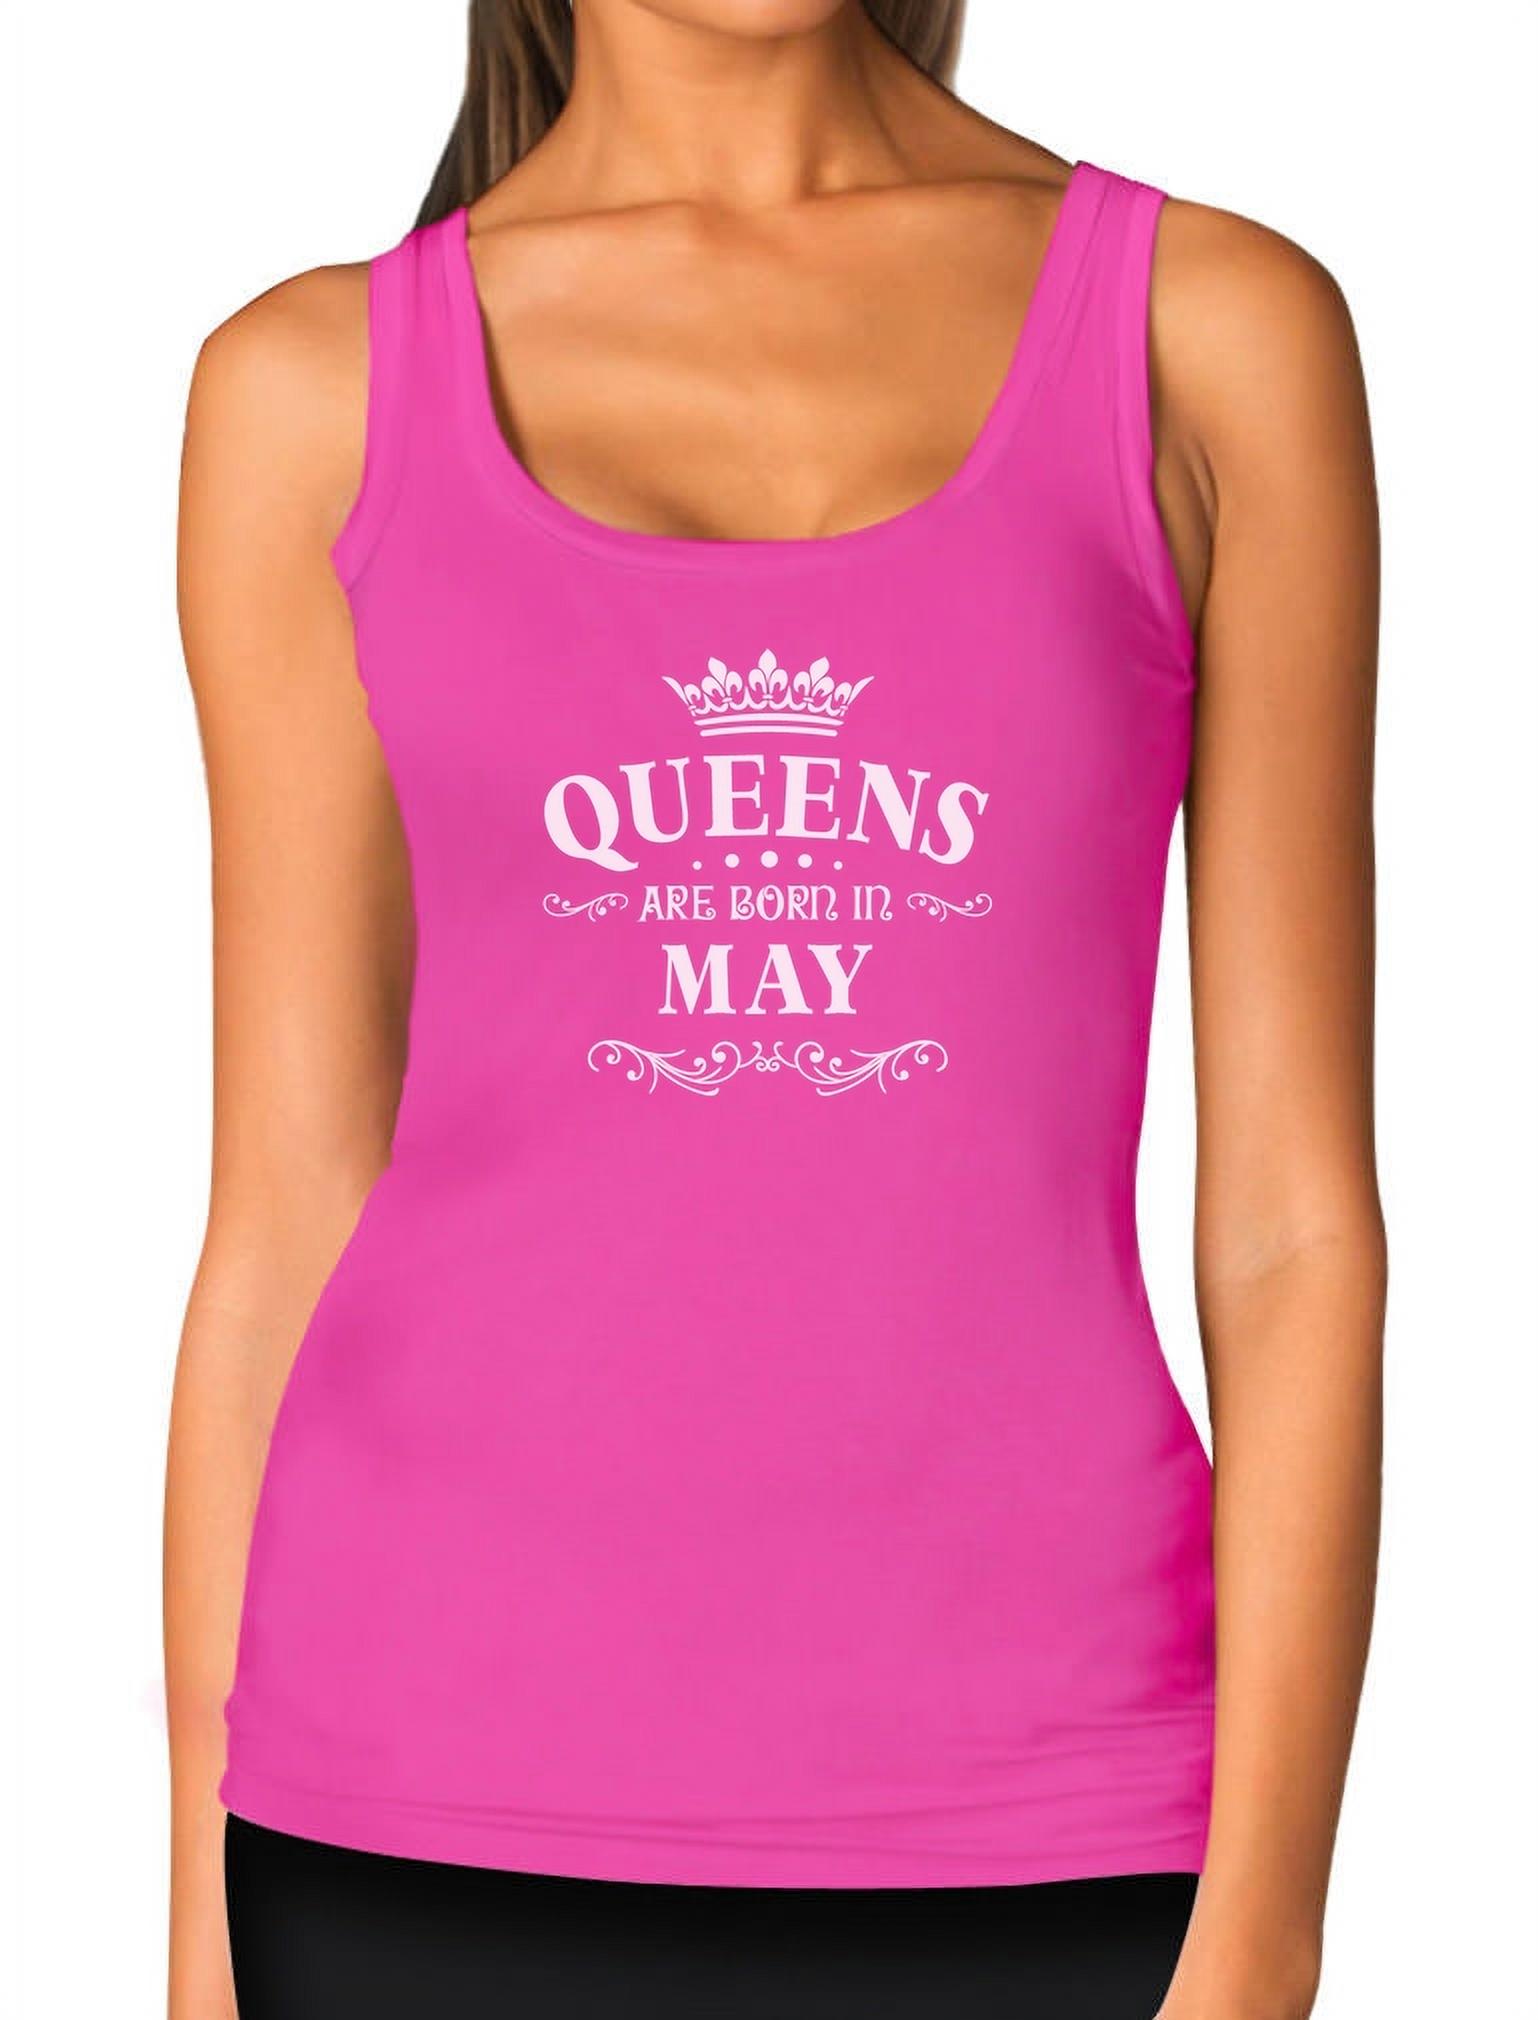 Tstars Womens Birthday Gift for Women Queens Are Born in May Birthday Party B Day Women Tank Top - image 1 of 4